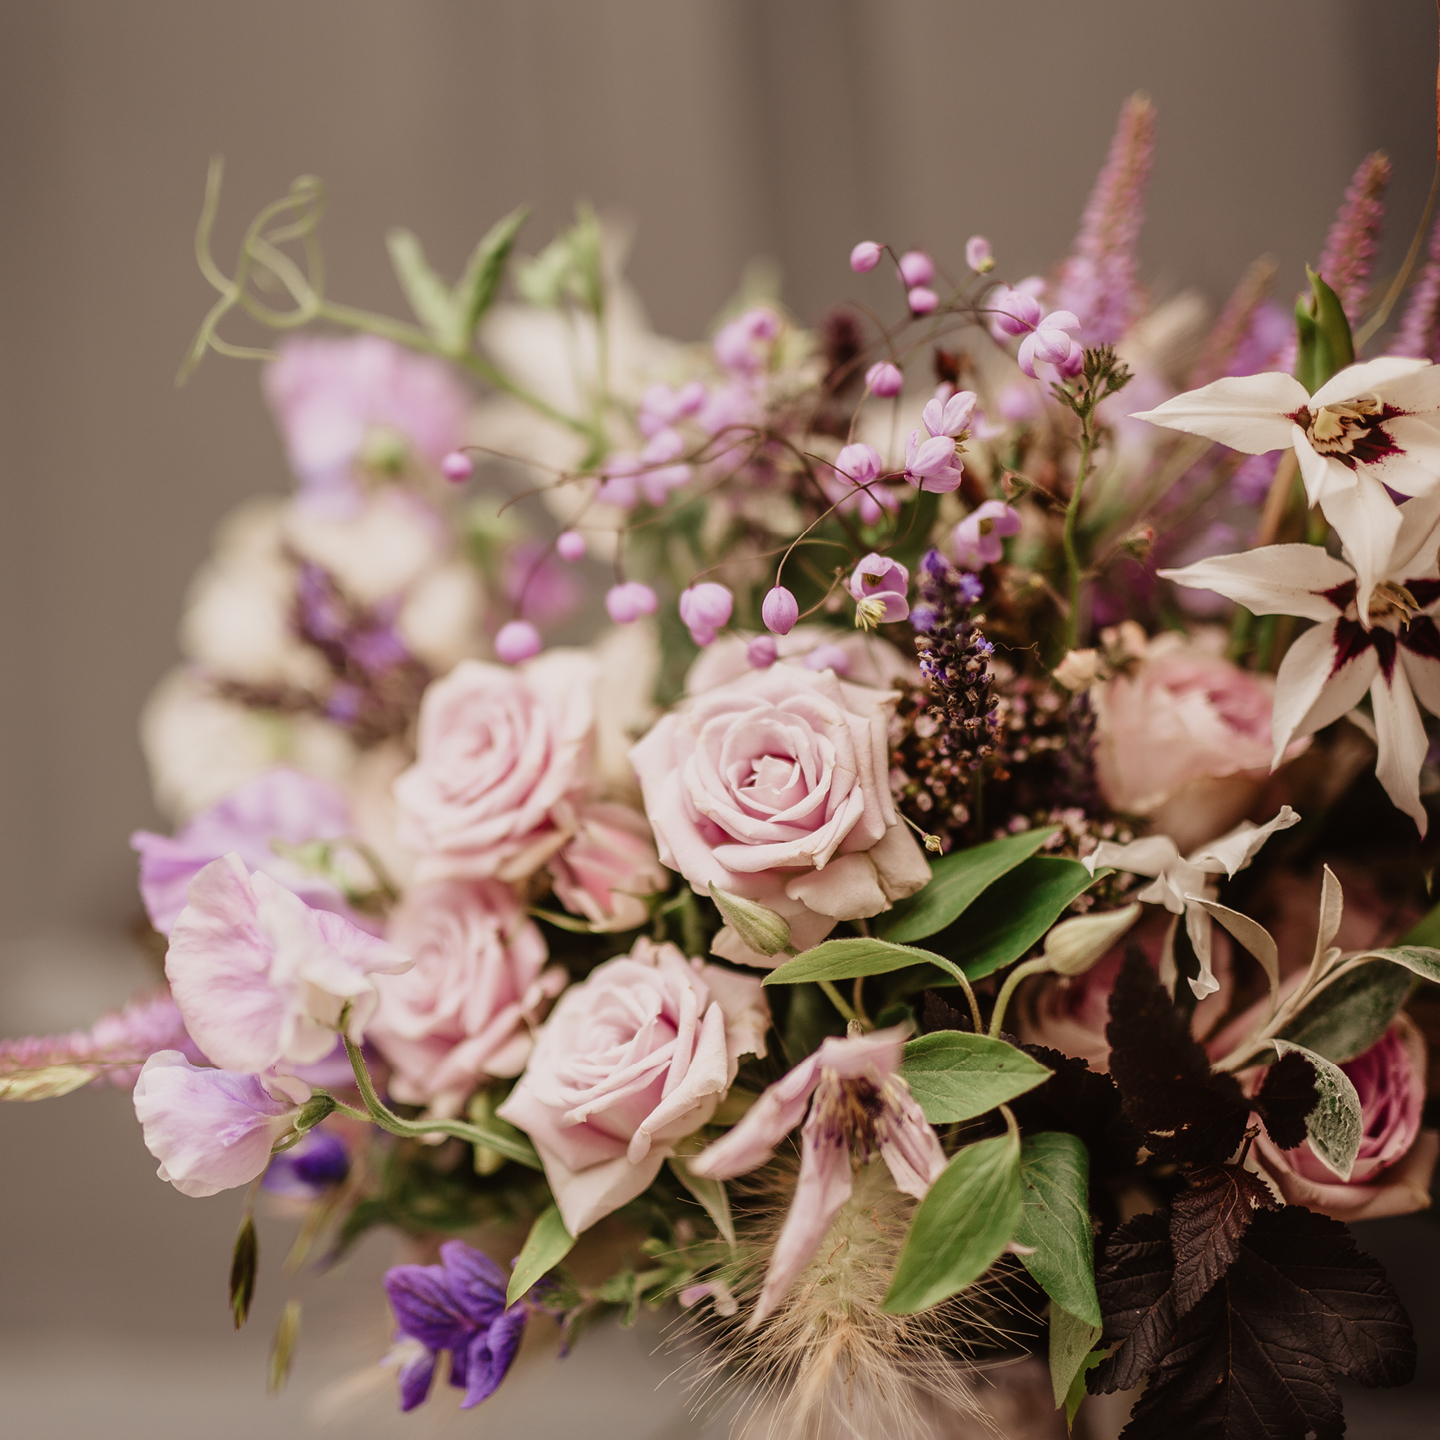 52 Ideas for Your Spring Wedding Bouquet